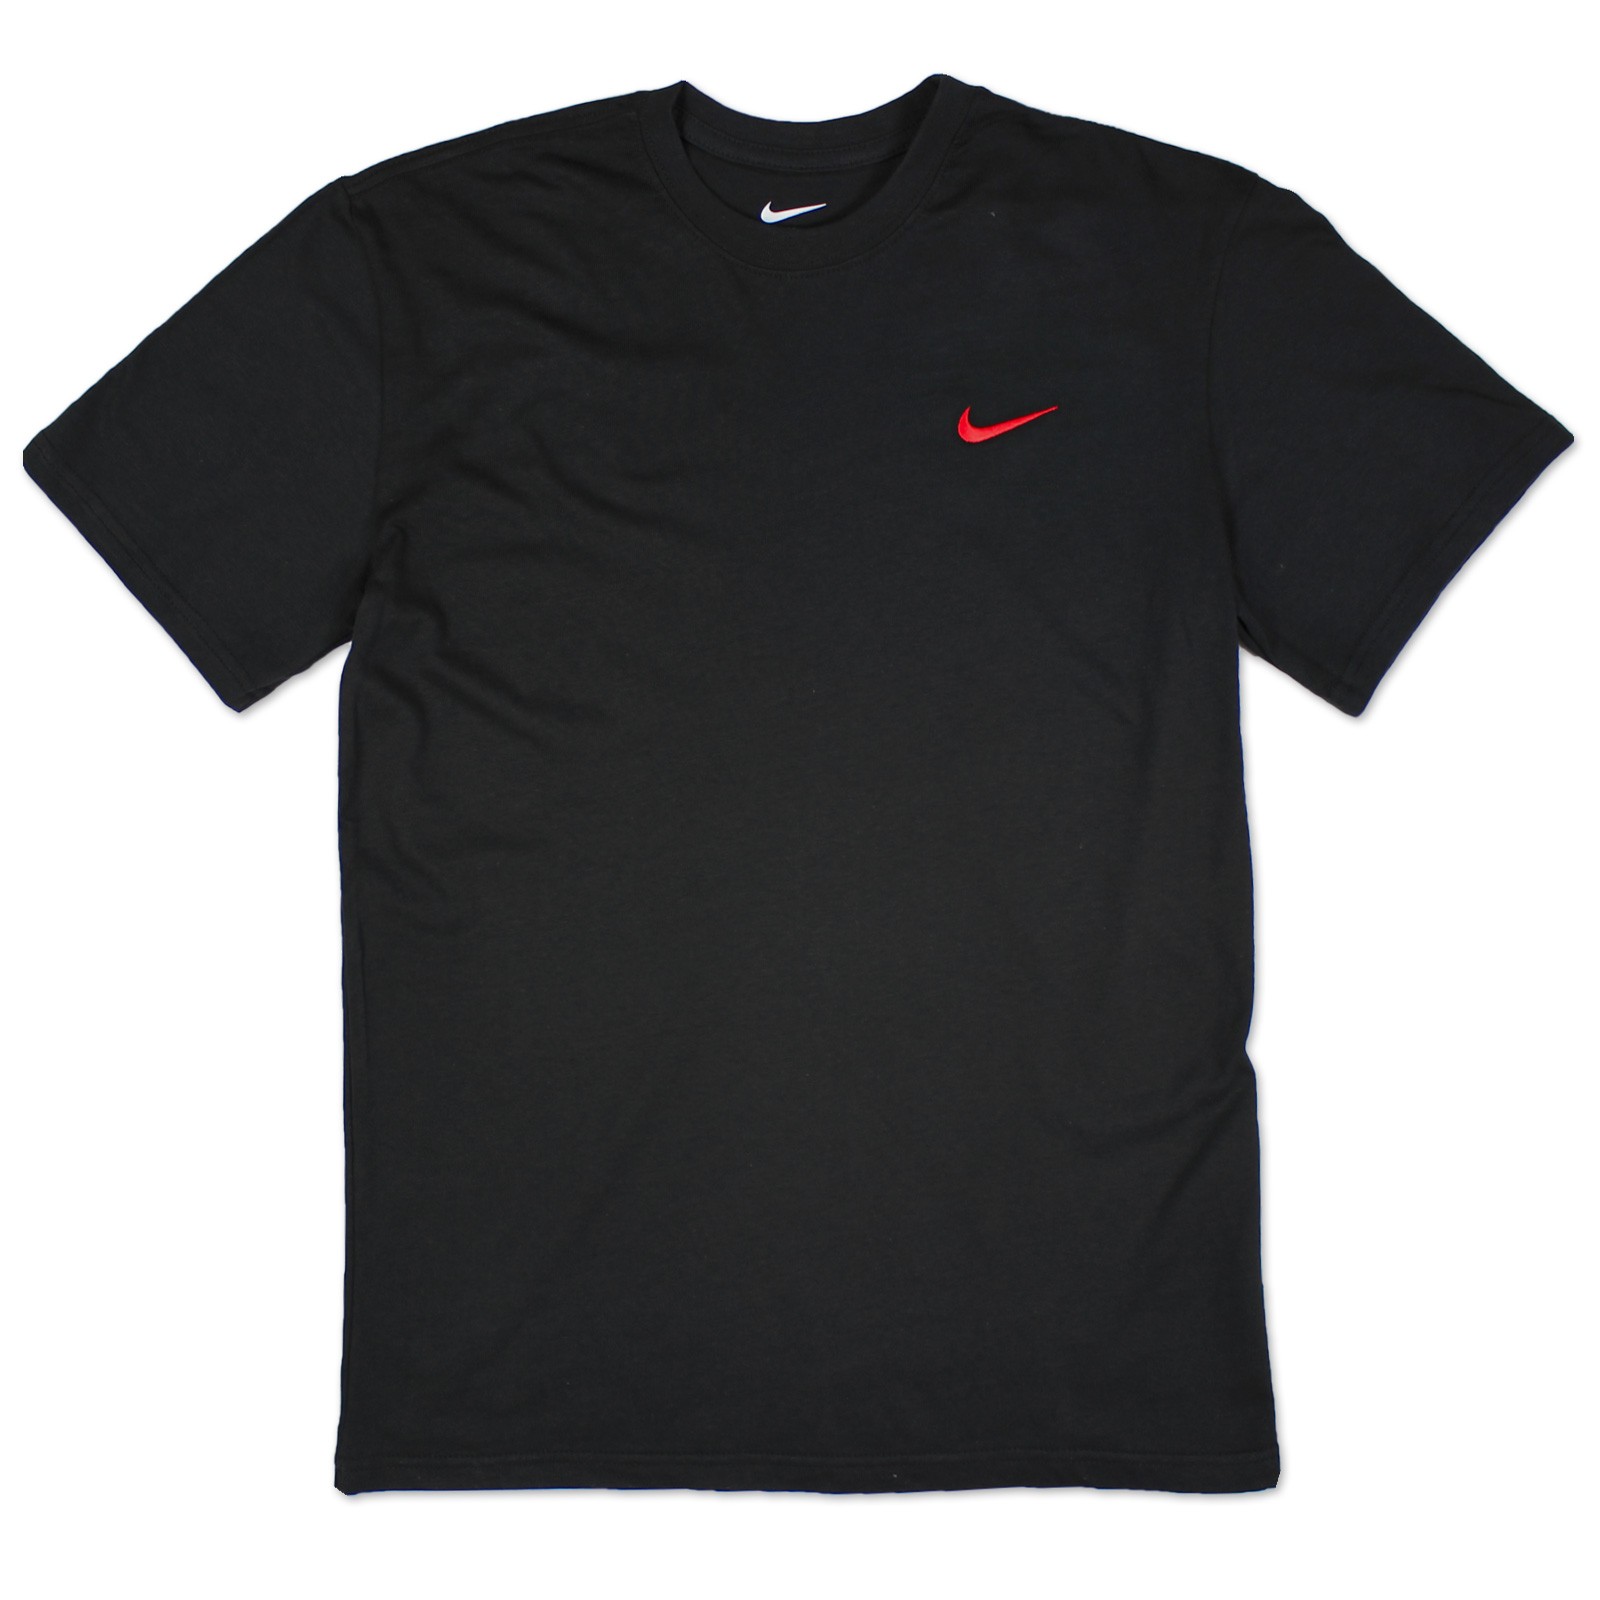 nike t shirts mens red and black